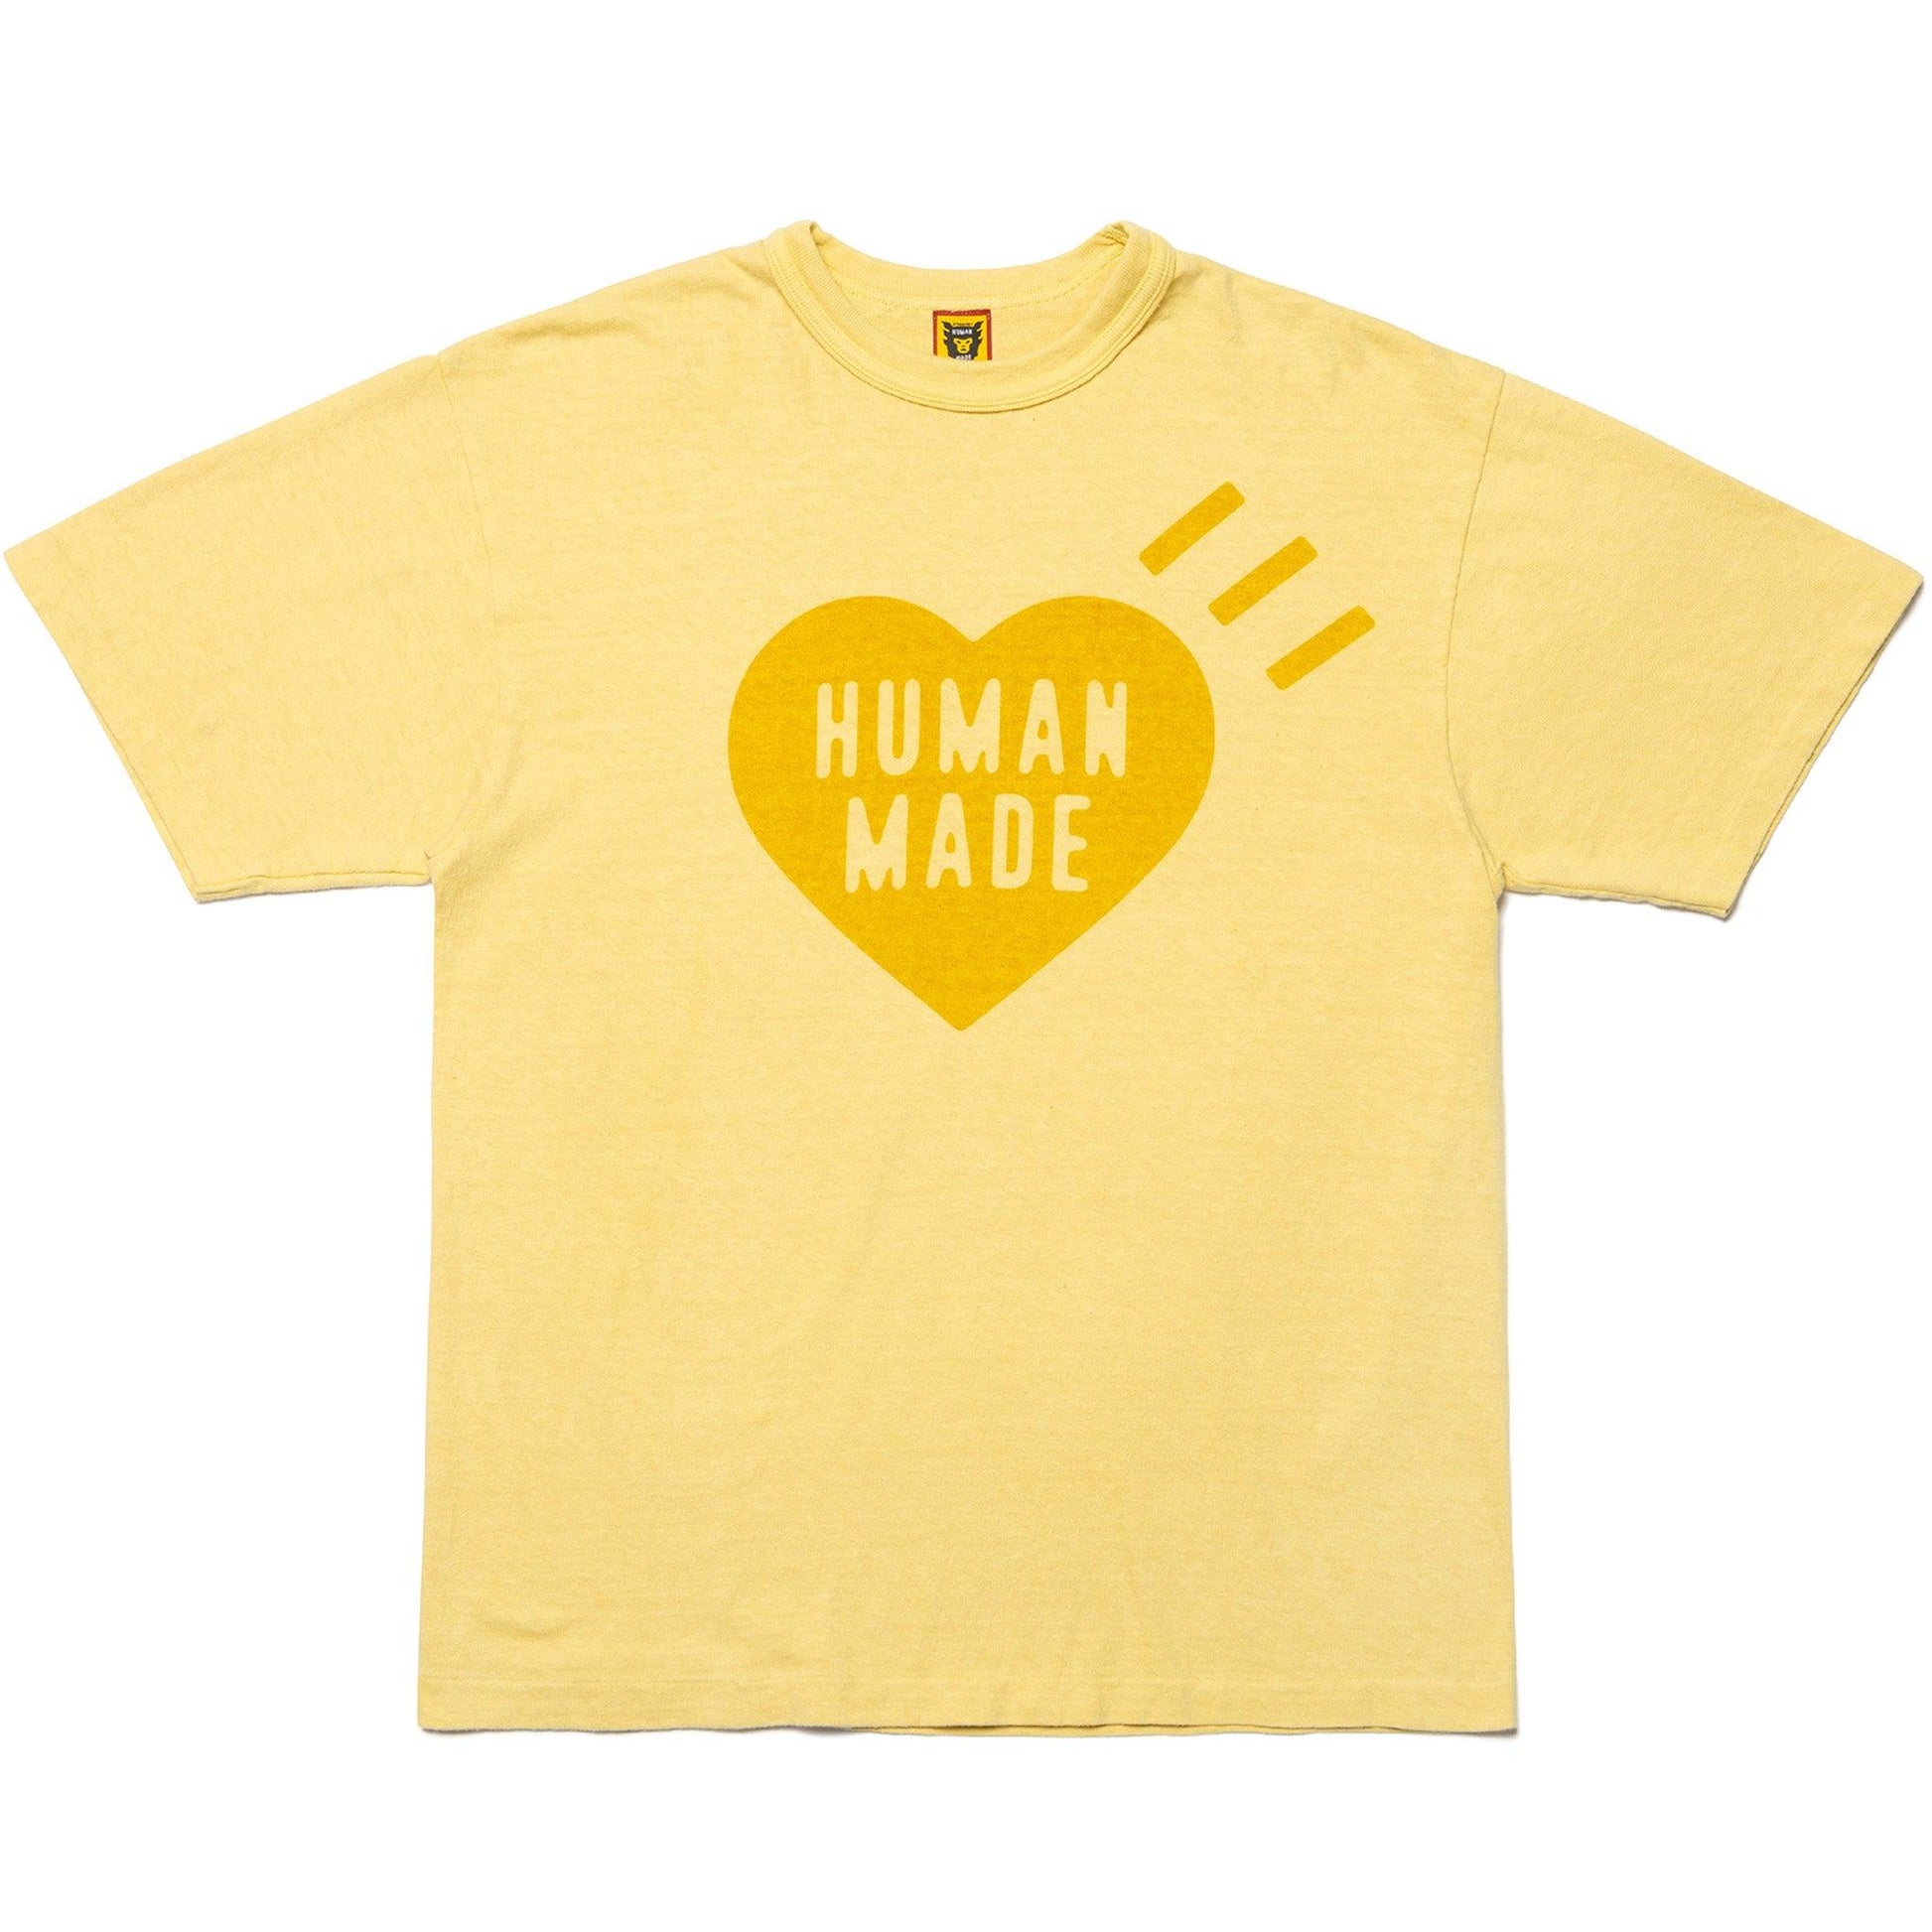 PLANT DYED T-SHIRT #2 - Human Made